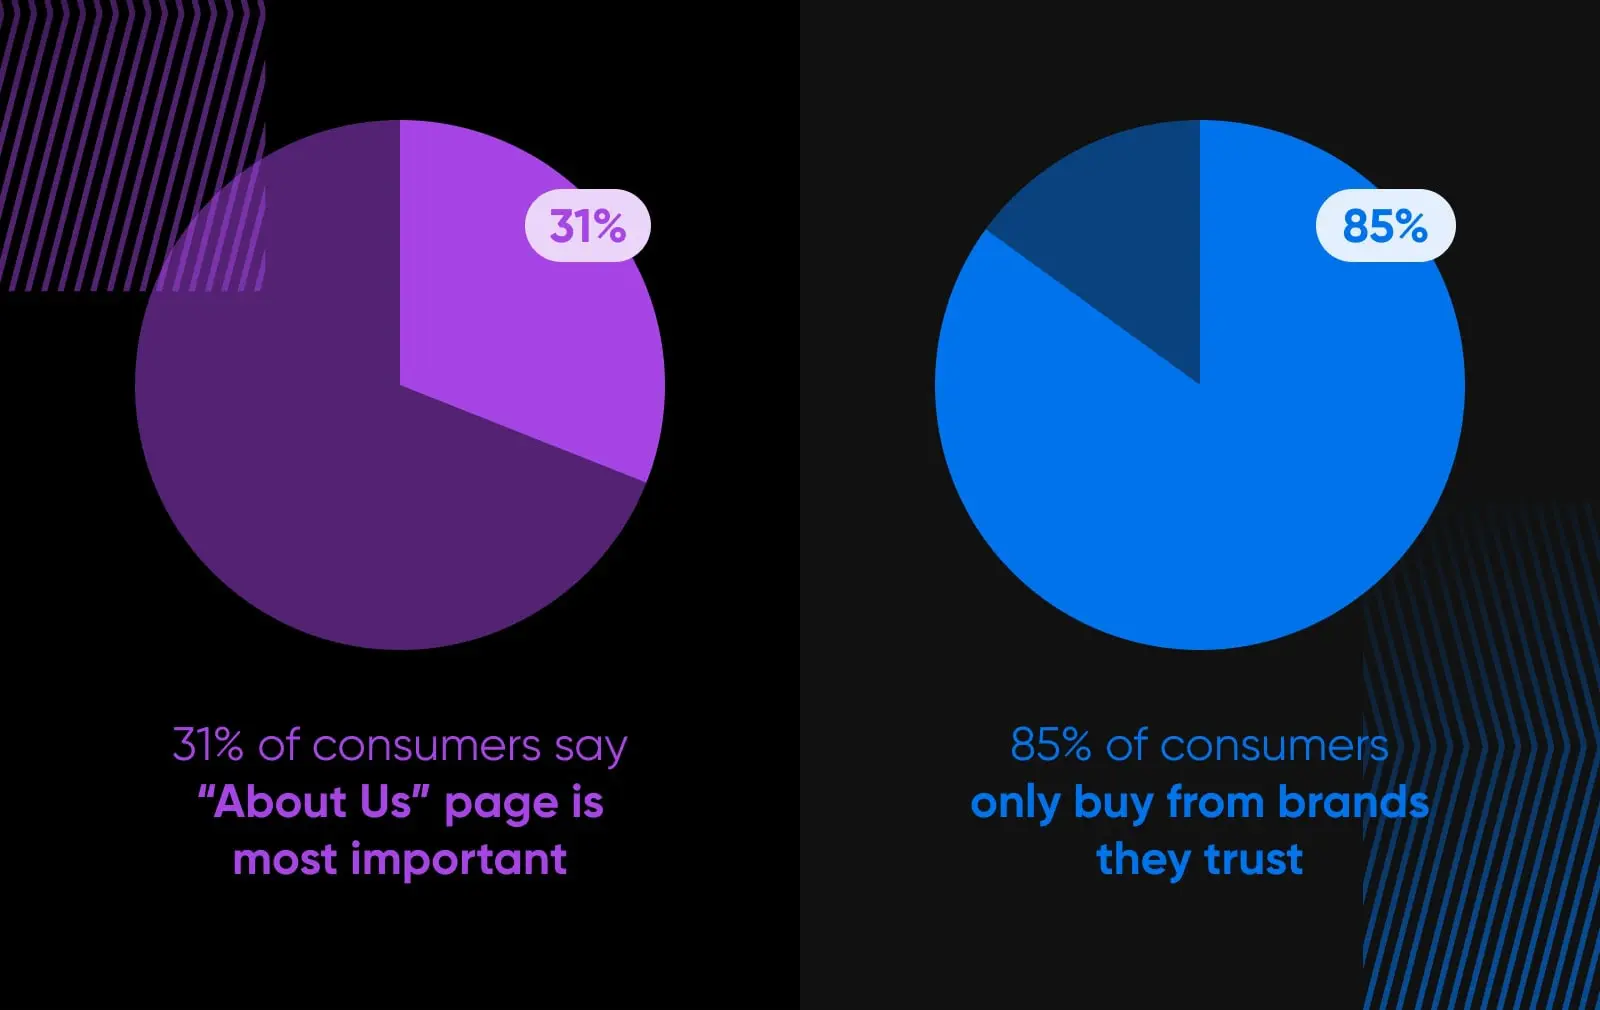 A good About Us page can help you to build that kind of bond with new visitors. One recent survey found that 31% of consumers say "About Us" page is most important. And 85% of consumers only buy from brands they trust.